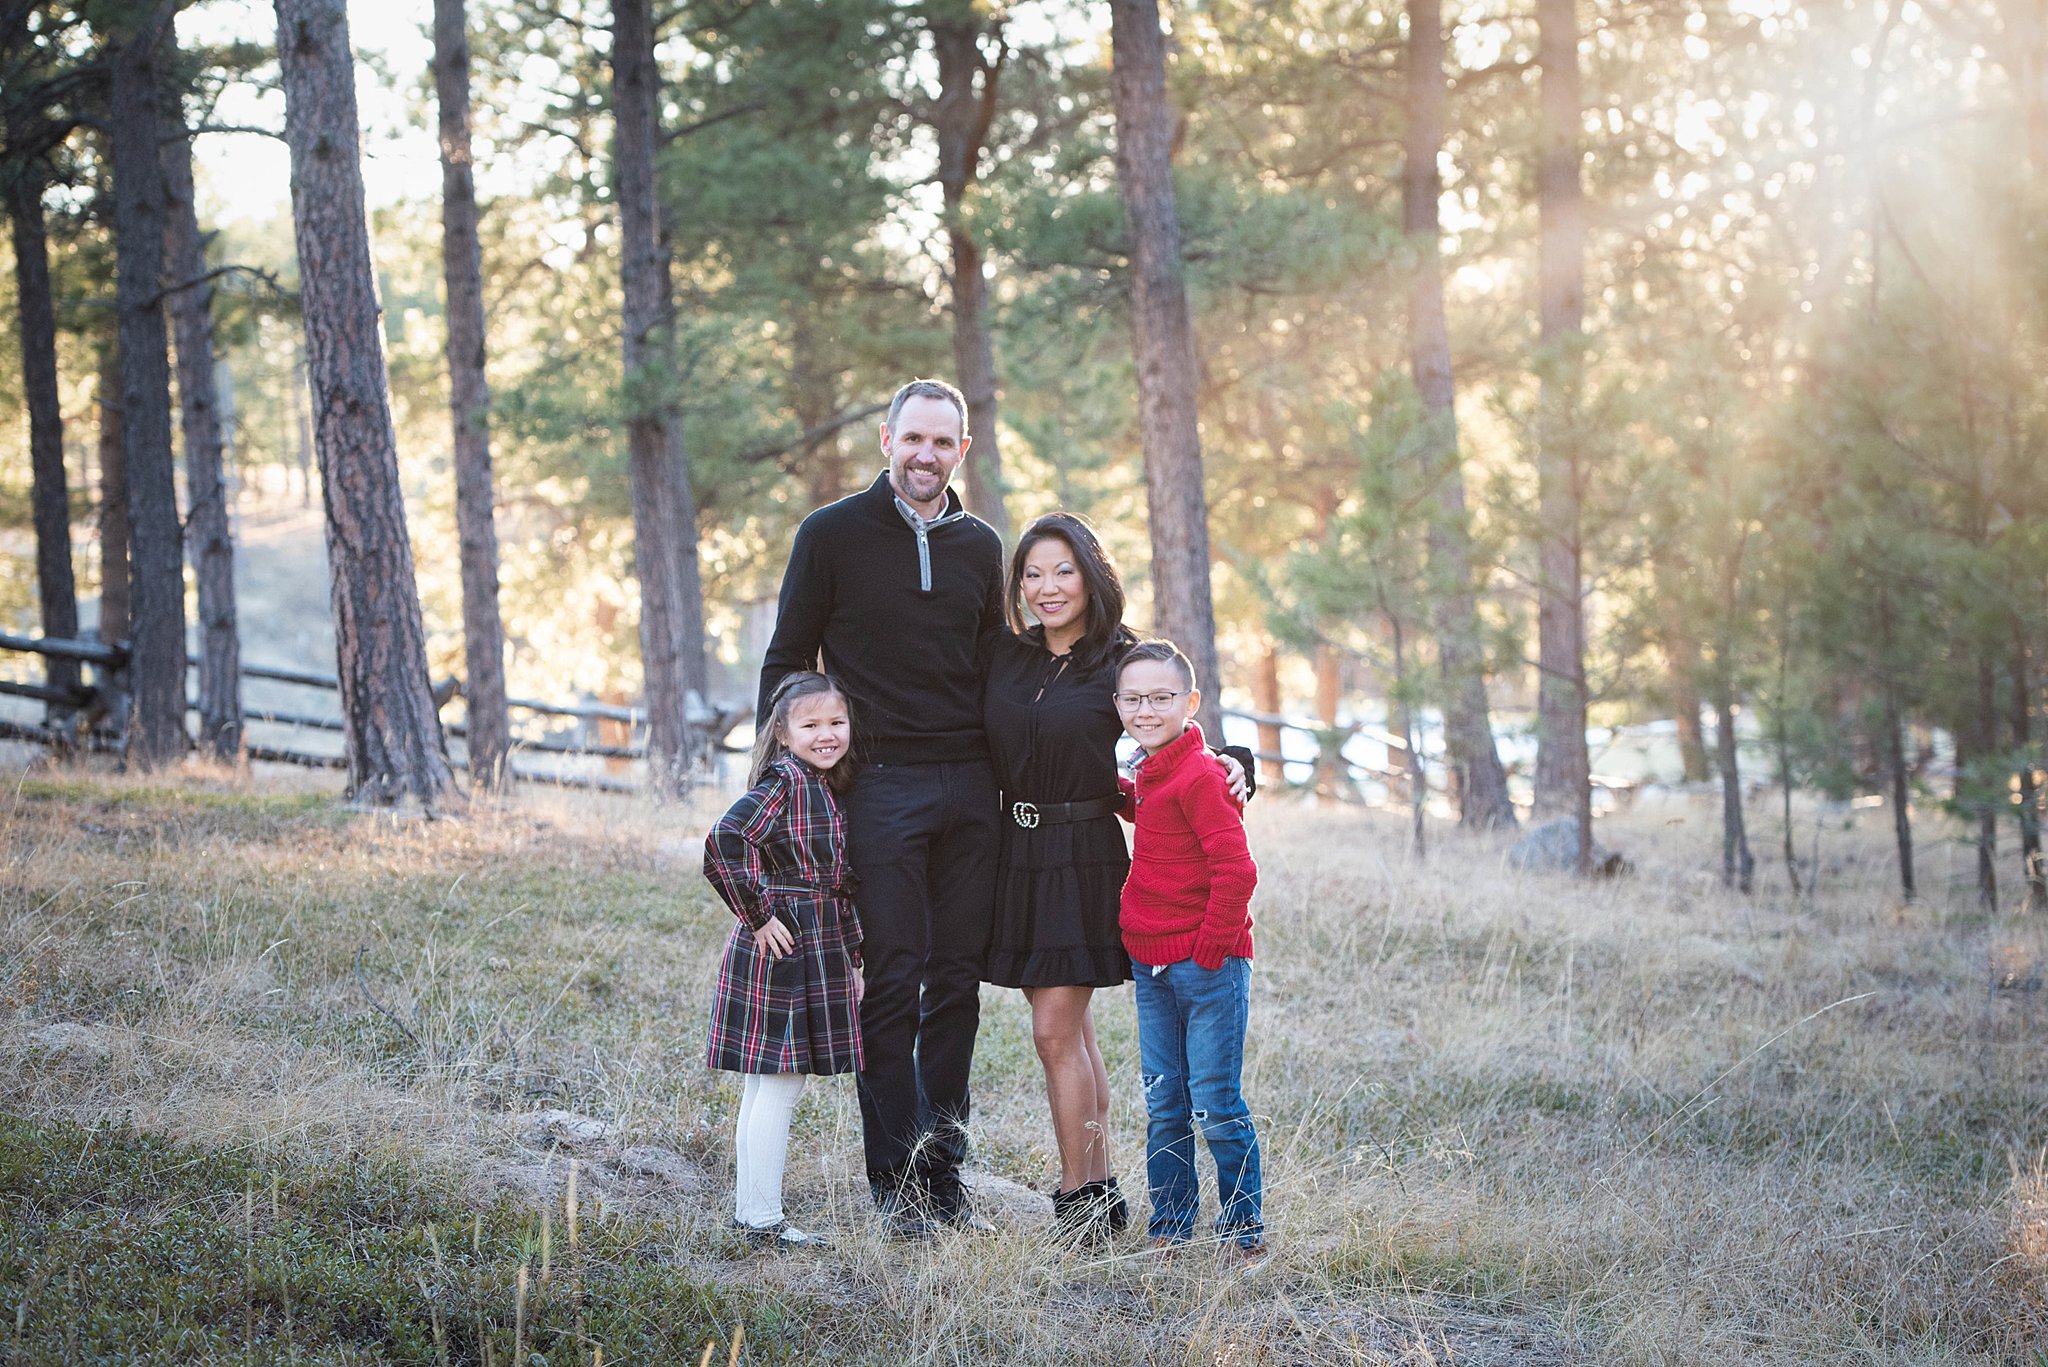 A mom and dad in black stand in a forest park with their young son and daughter at sunset during colorado springs family activities